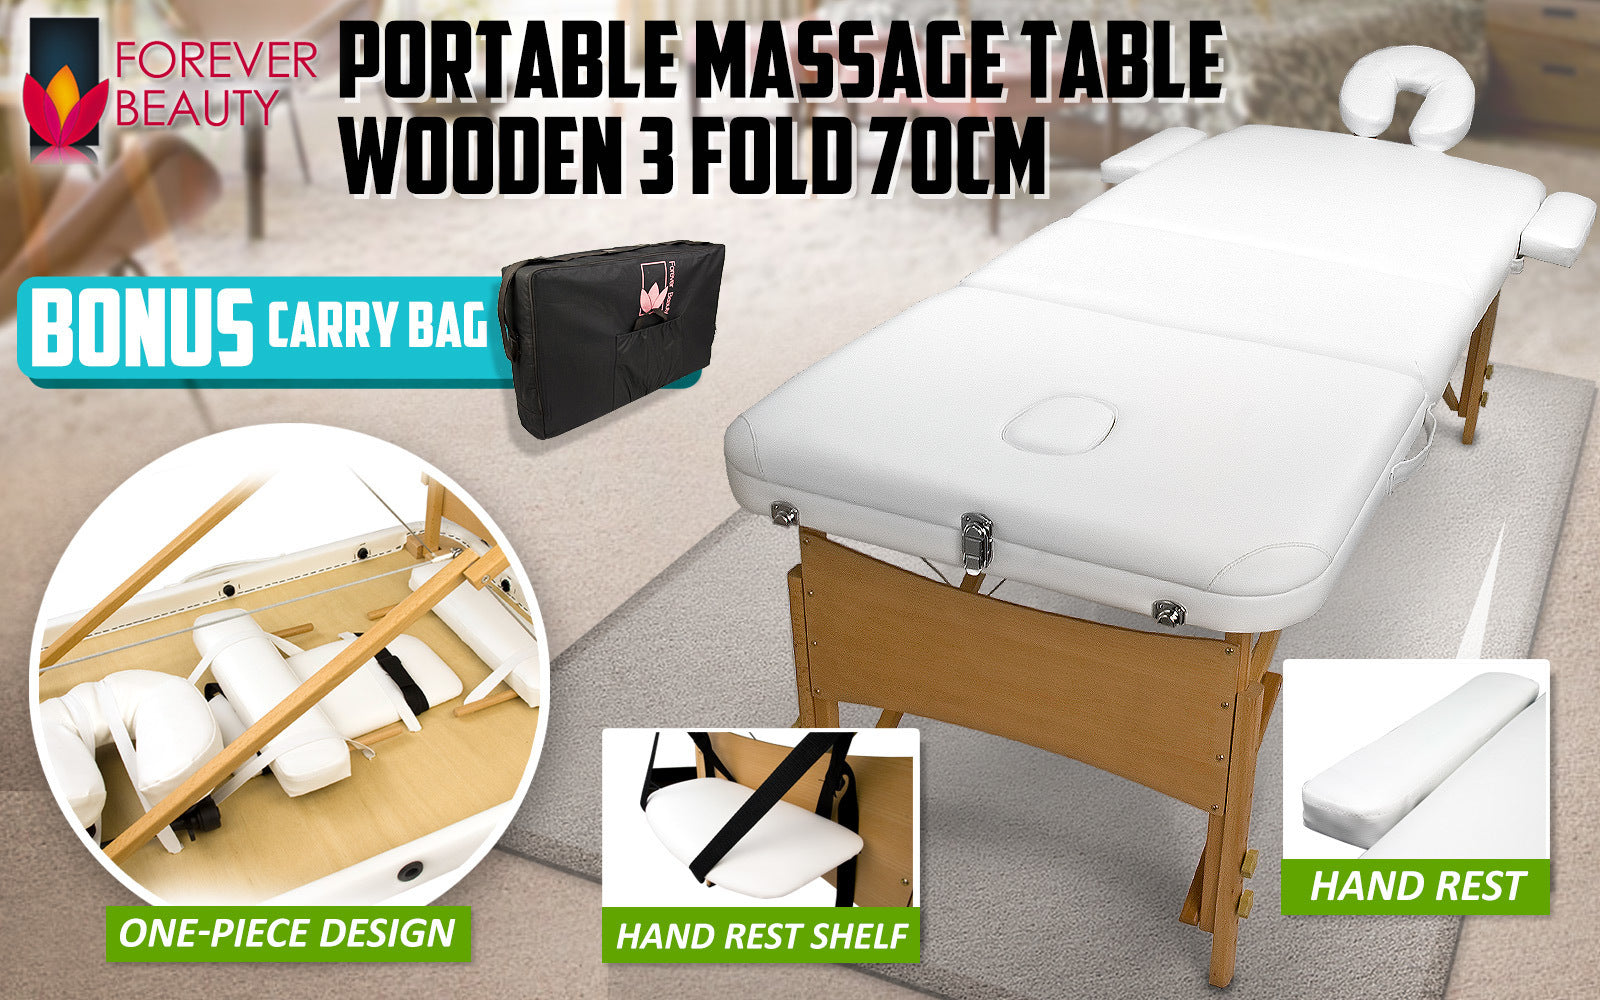 Forever Beauty White Portable Beauty Massage Table Bed 3 Fold 70cm Wooden - SILBERSHELL